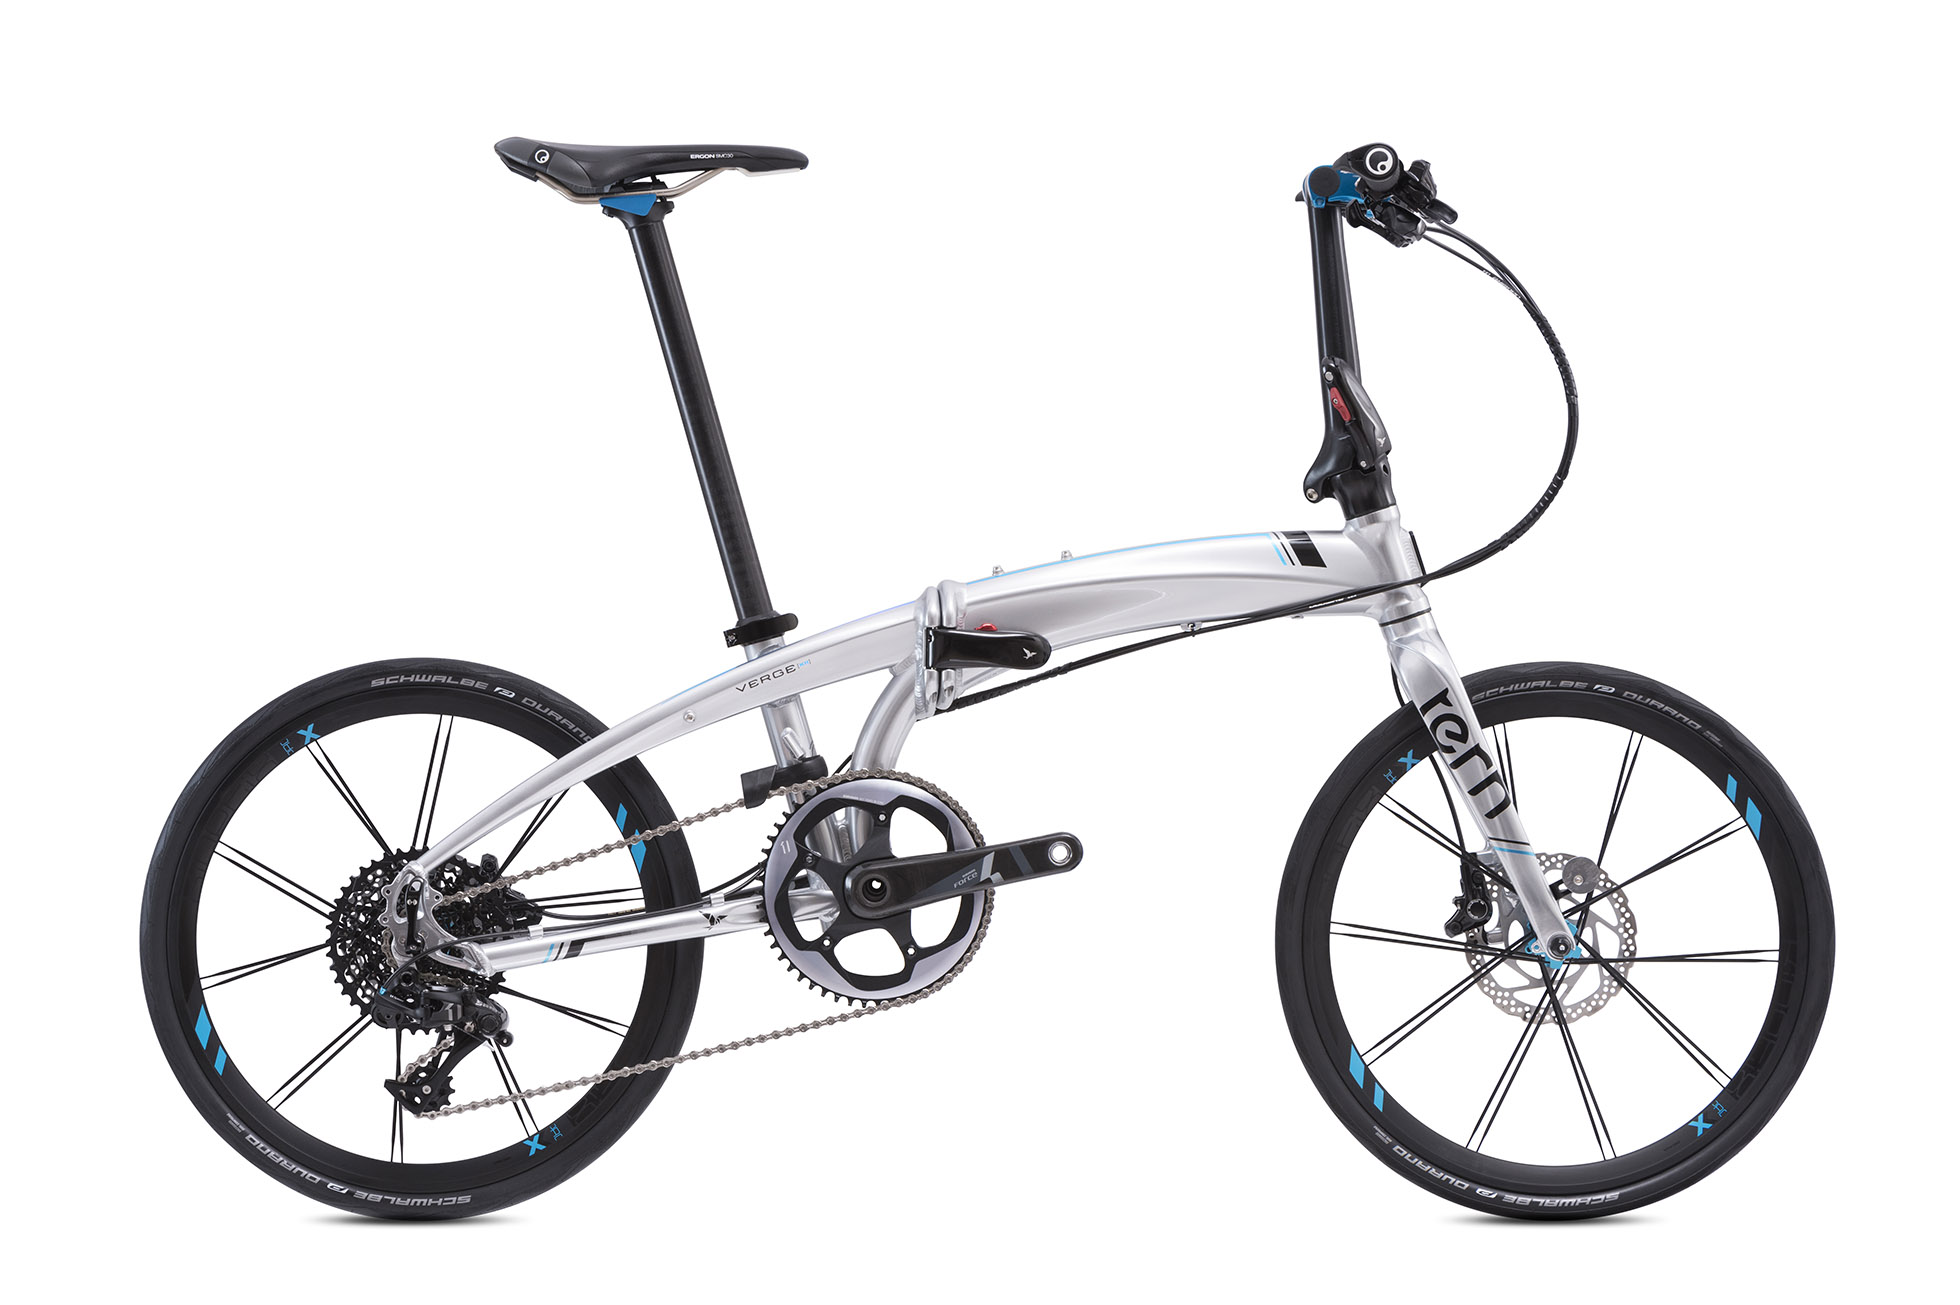 Verge X11: Our Top Folding Bike, Built For Speed